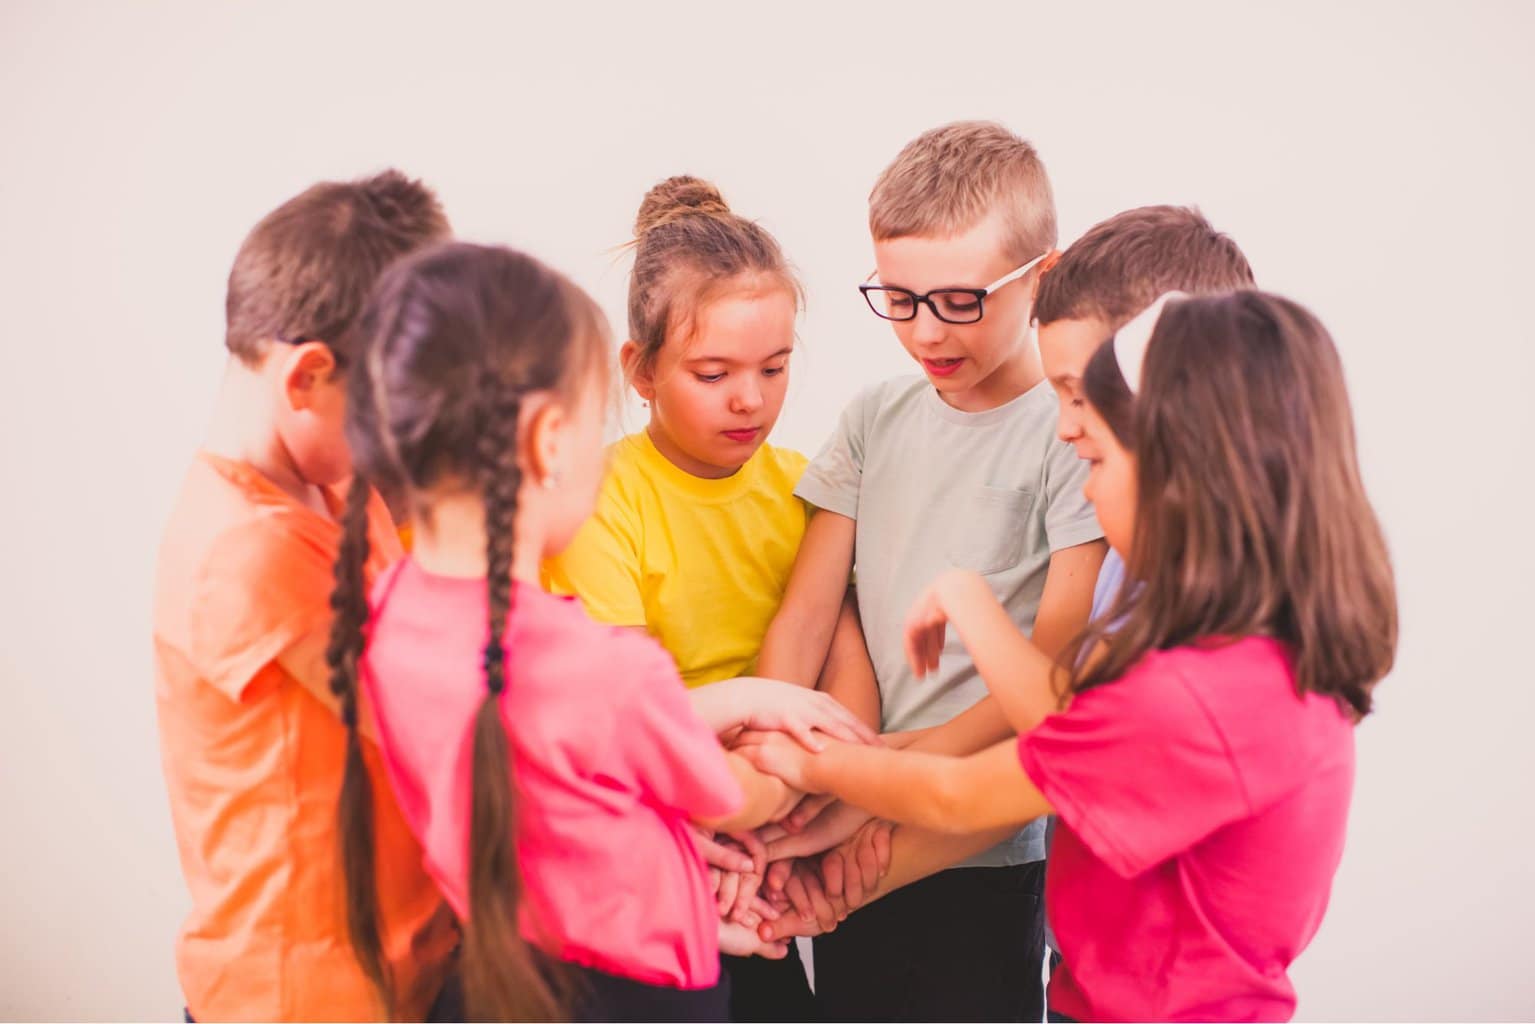 Kids with their hands together in a circle.